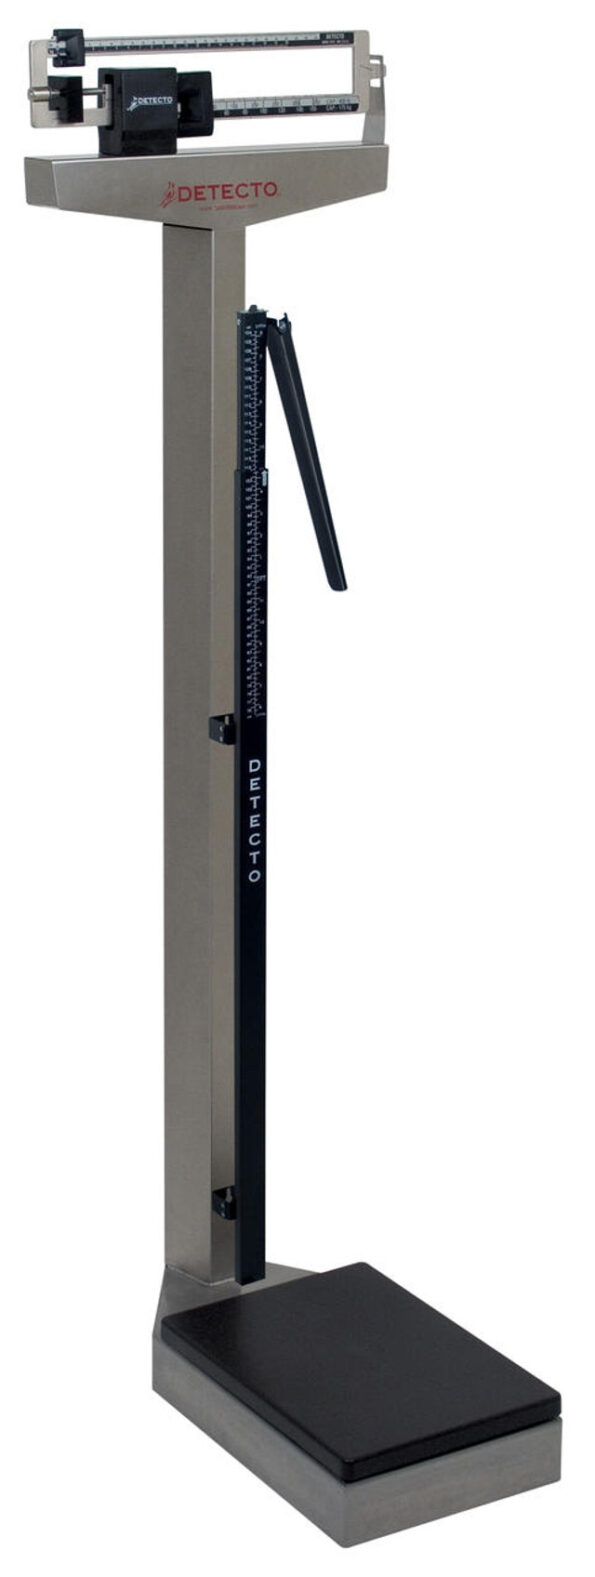 detecto cardinal detecto 439s stainless steel mechanical physician scale with height rod 450 lb x 4 oz 18225 1 439S